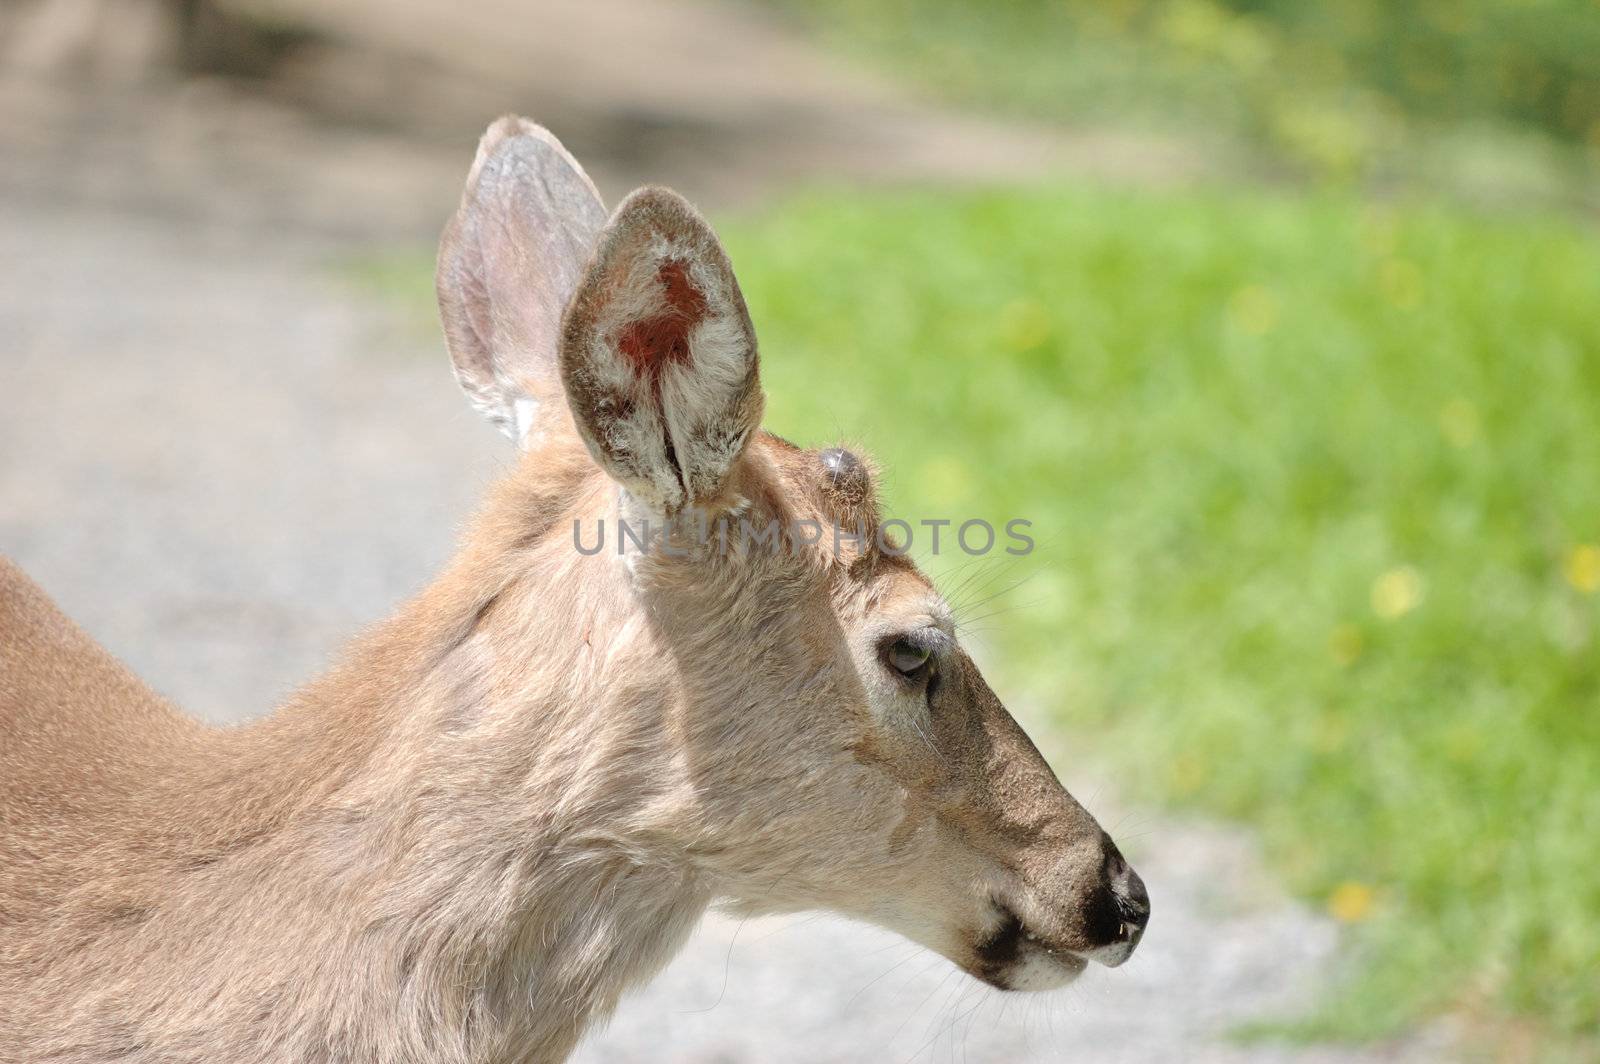 A whitetail deer button buck close up head shot shedding winter coat in late spring.